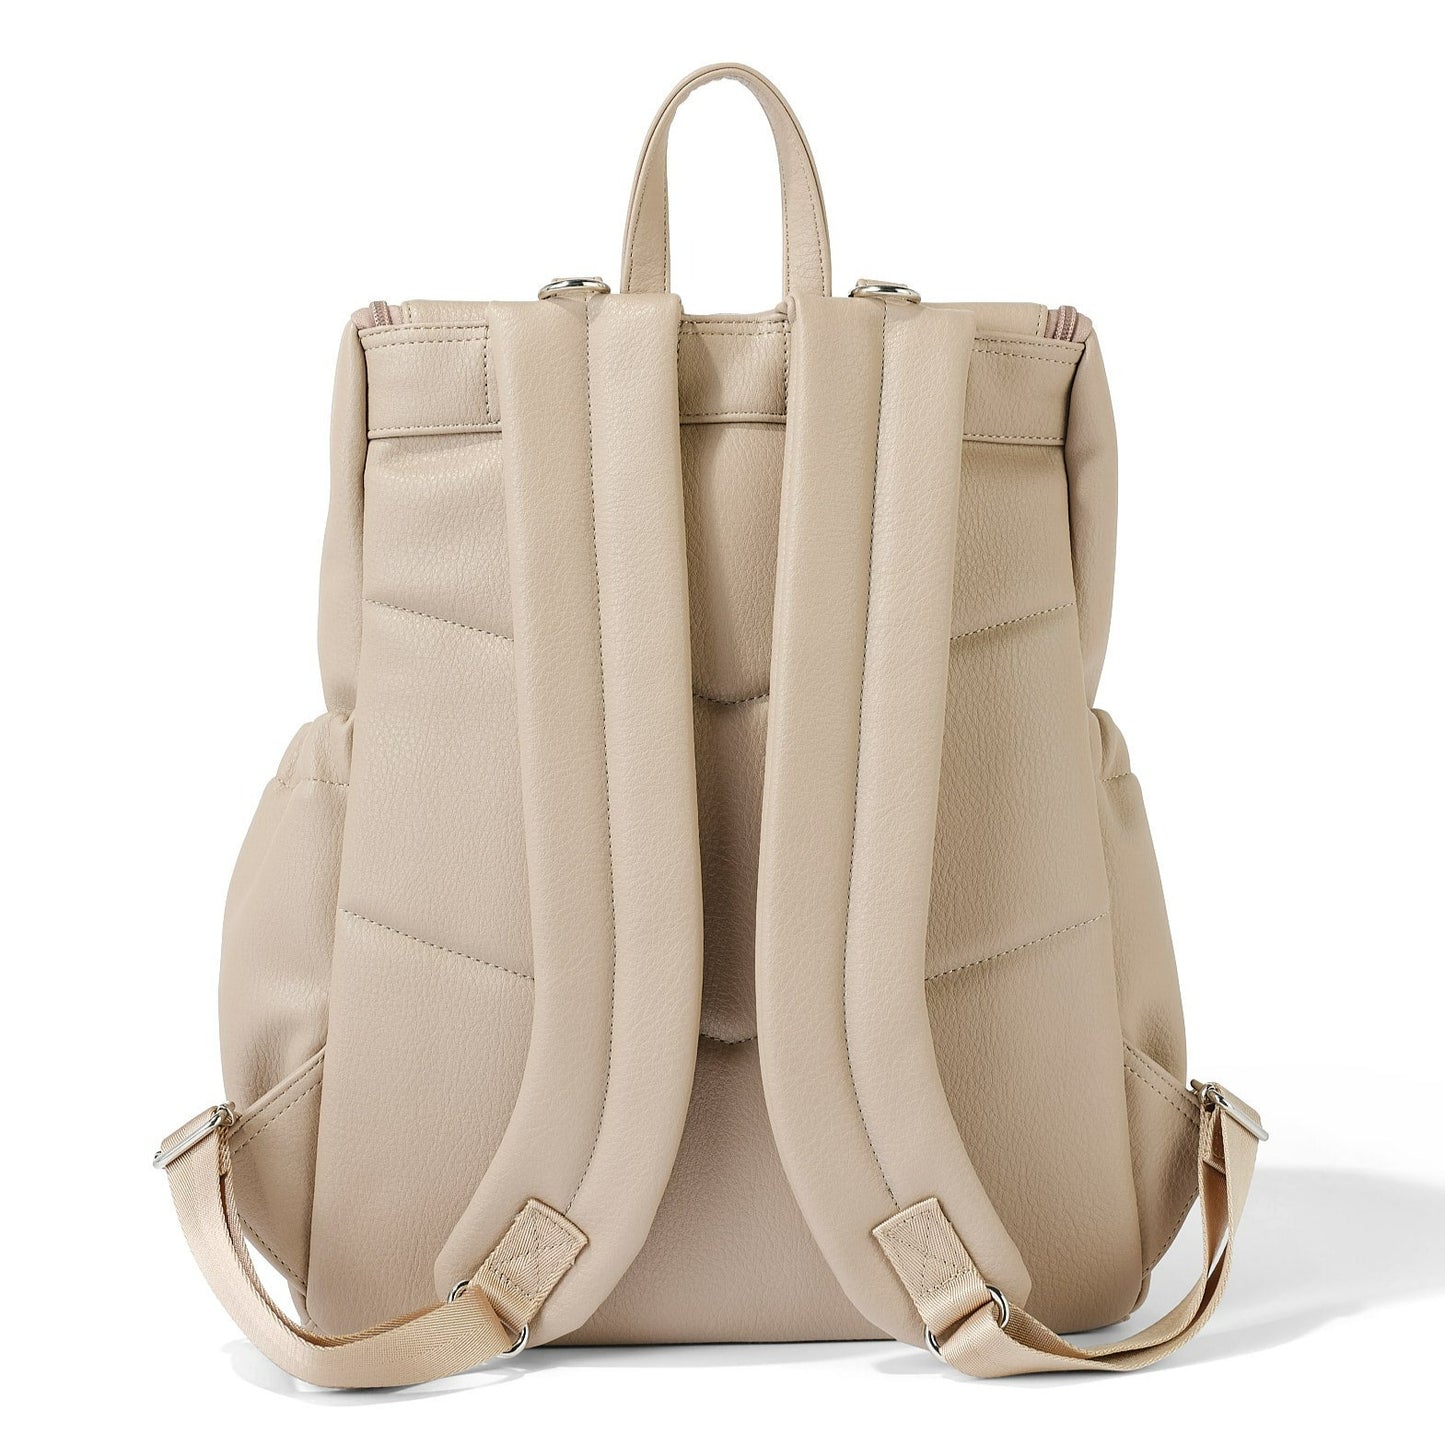 Dimple Faux Leather Diaper Backpack - Oat